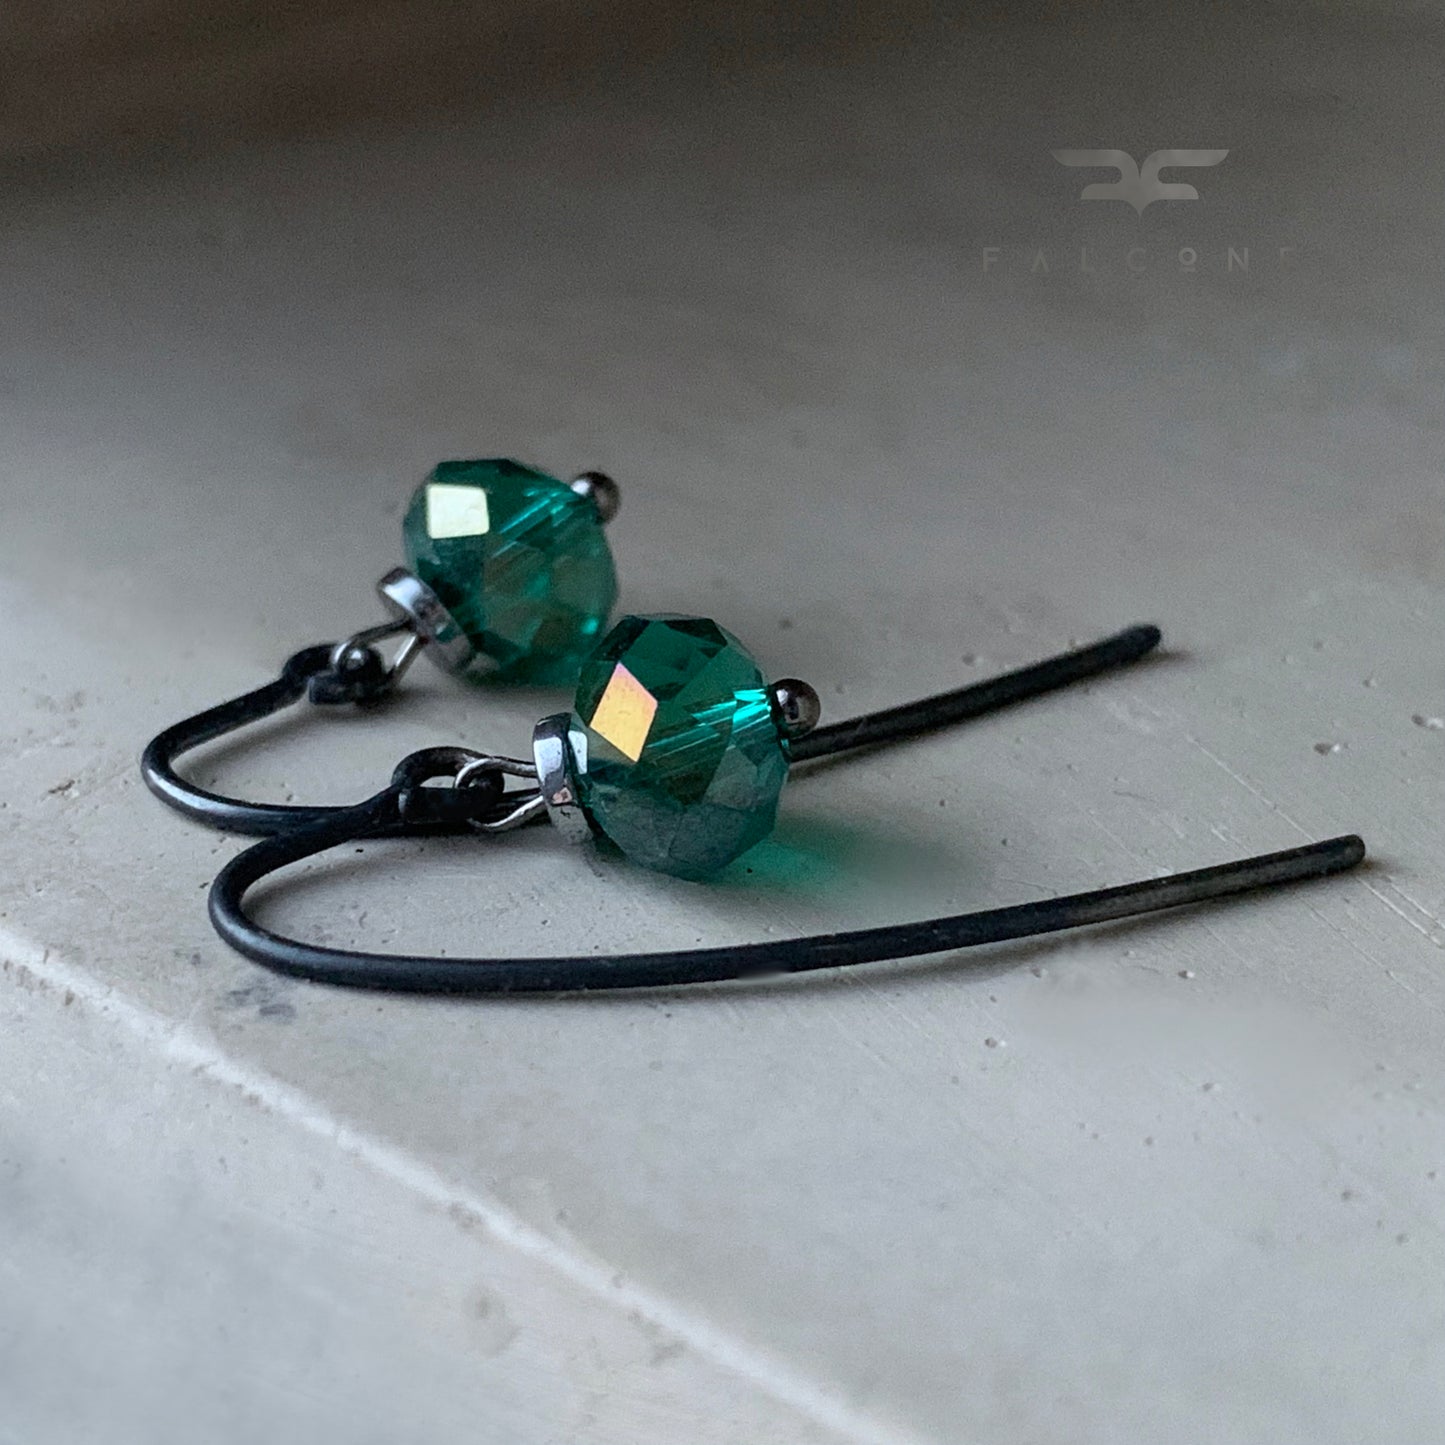 Earrings of glass and silver 'Turquoise Lanterns'